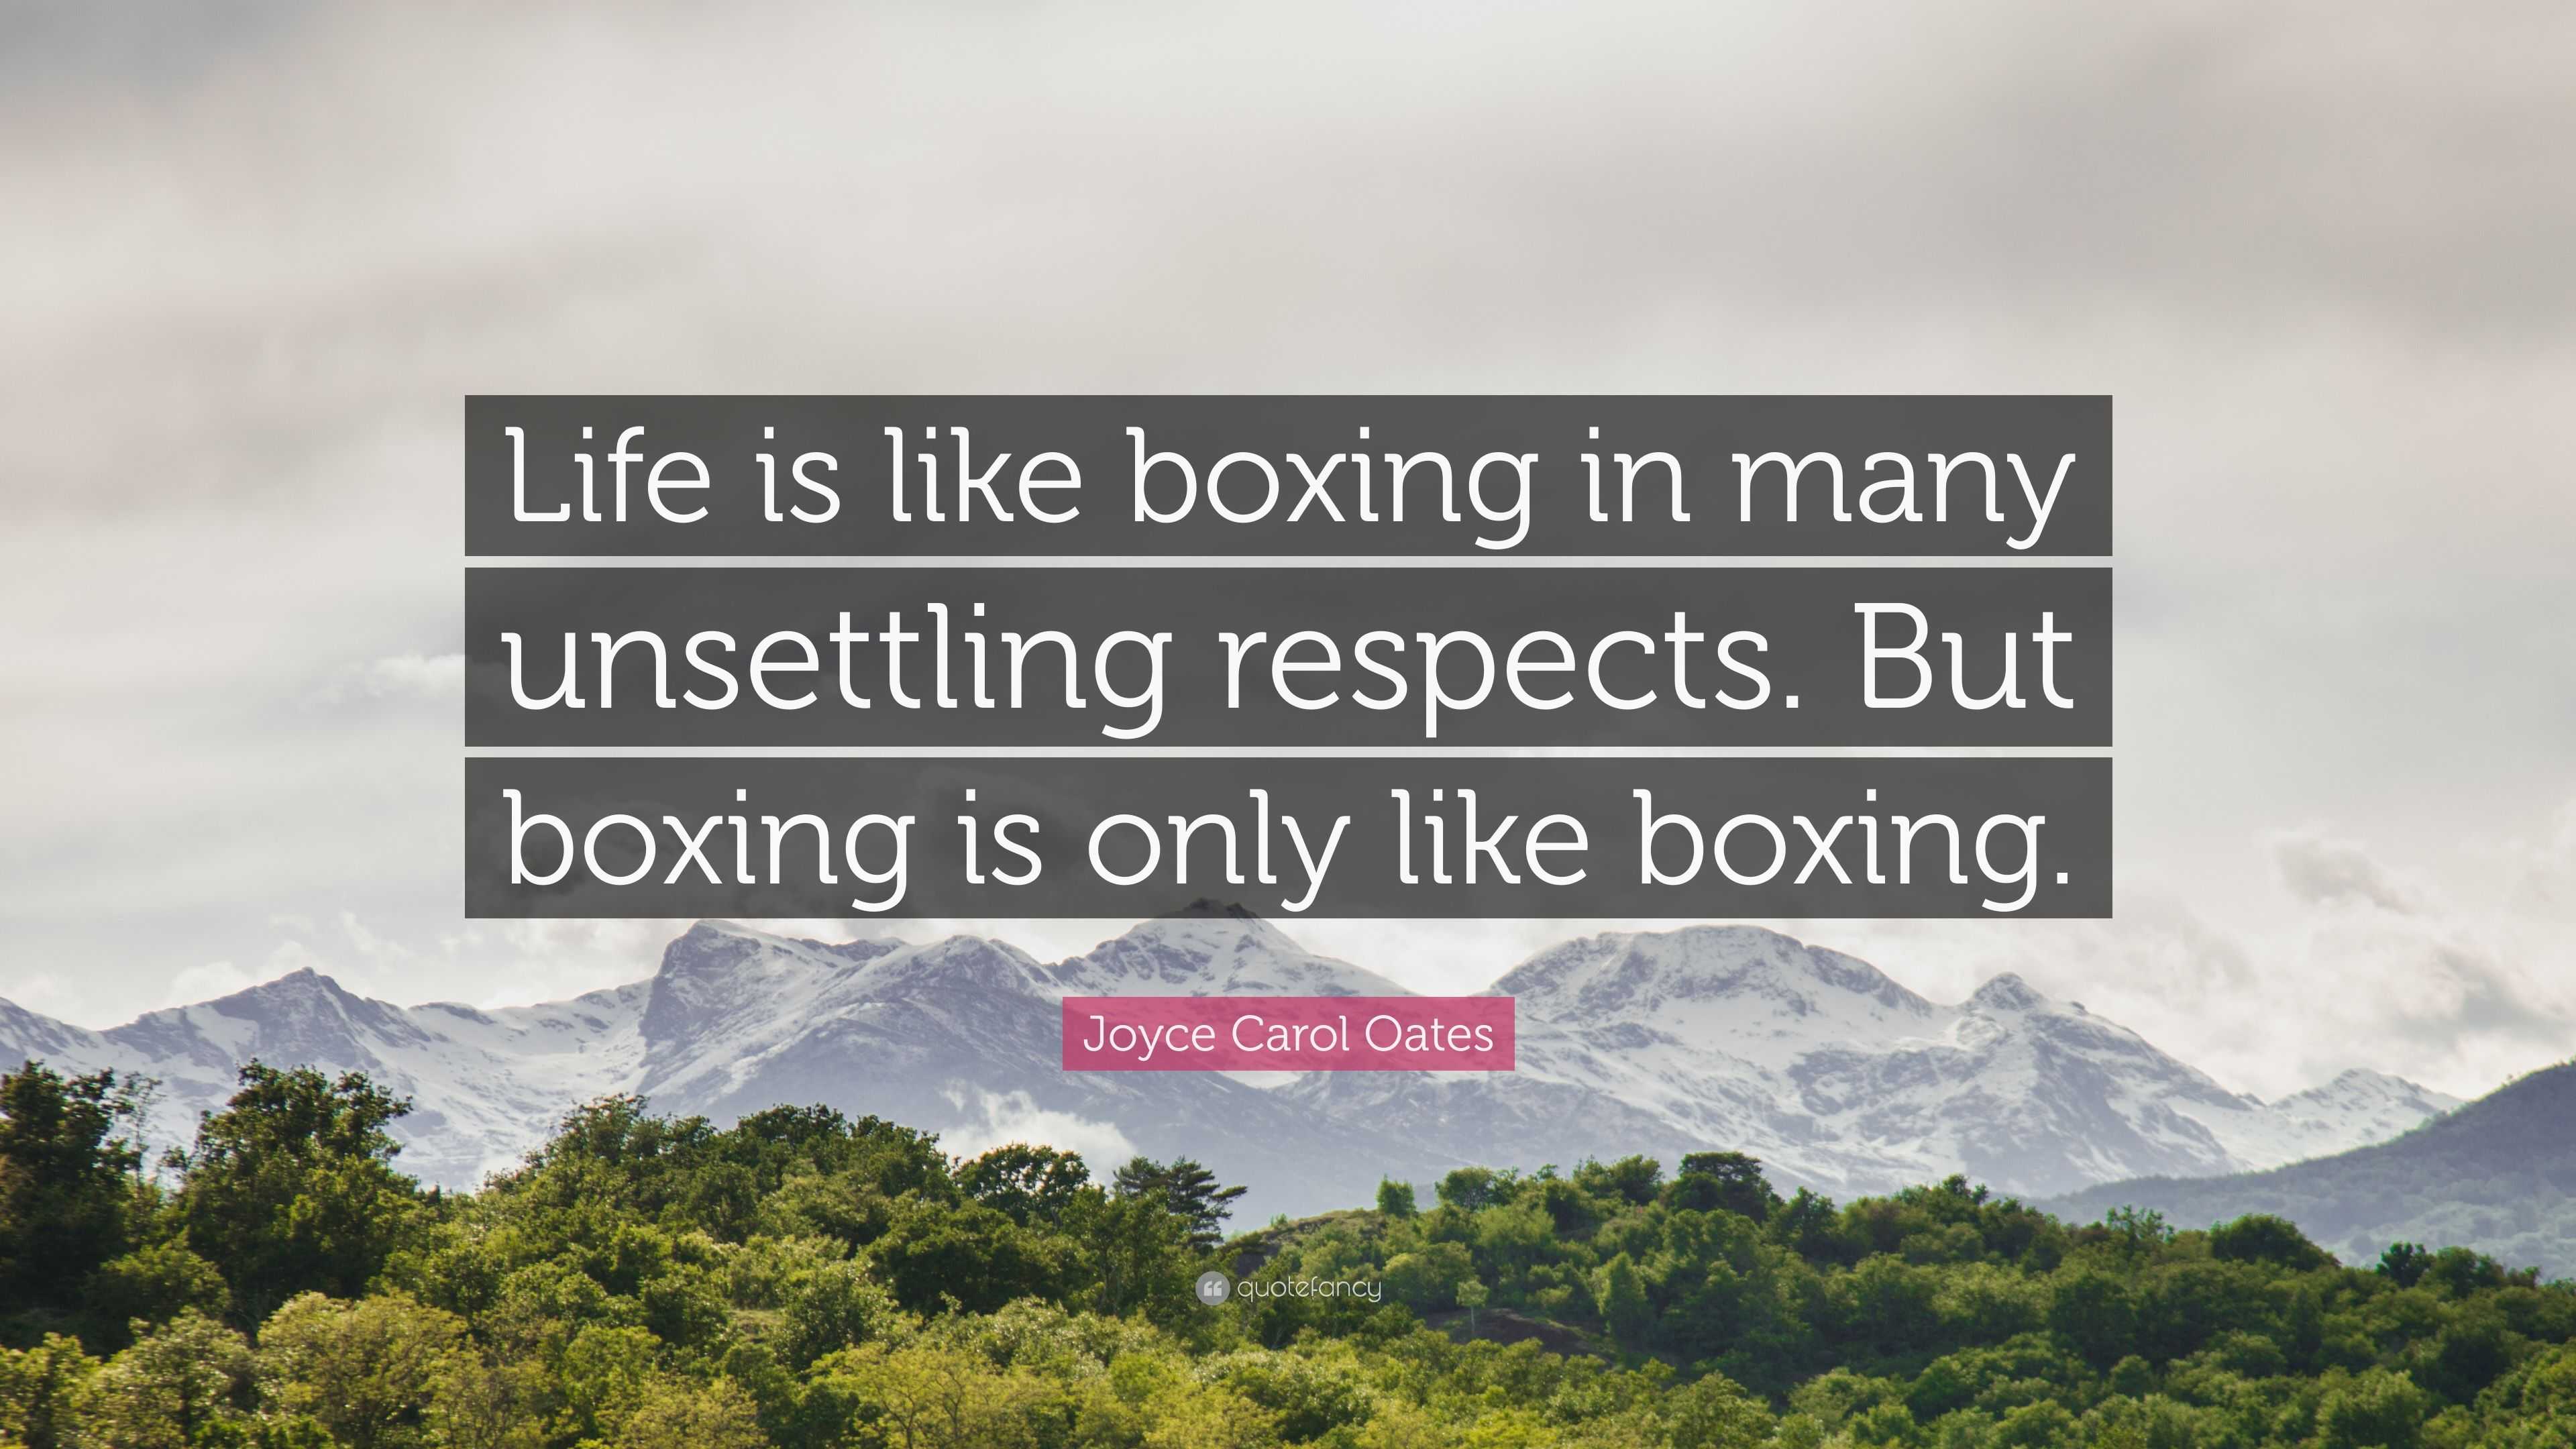 Joyce Carol Oates Quote “Life is like boxing in many unsettling respects But